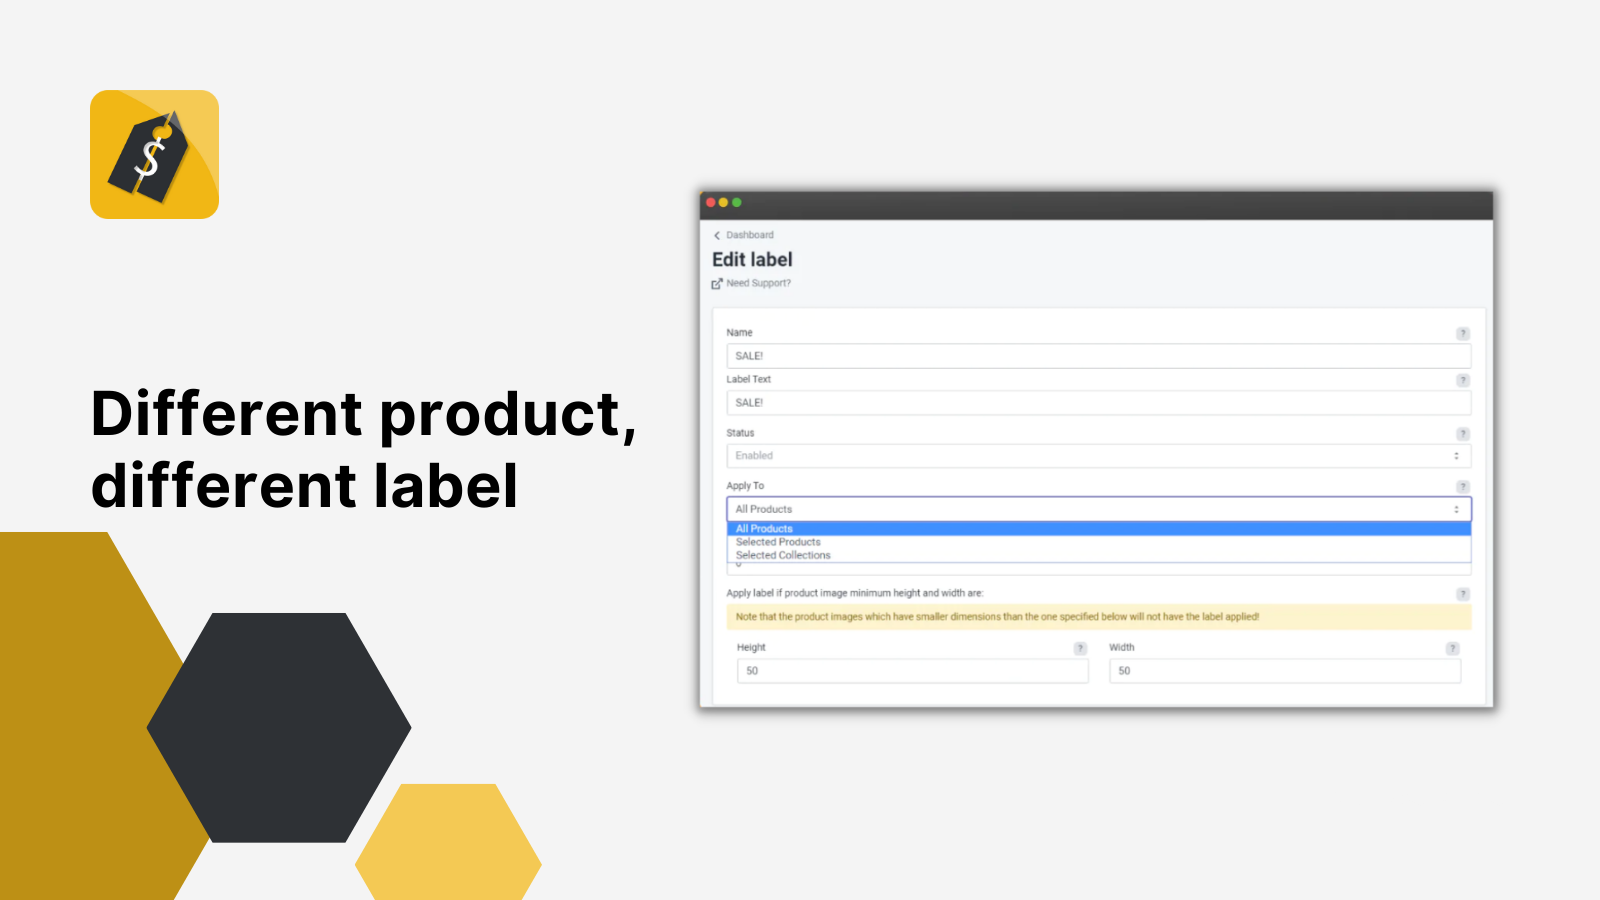 Create different labels for different products